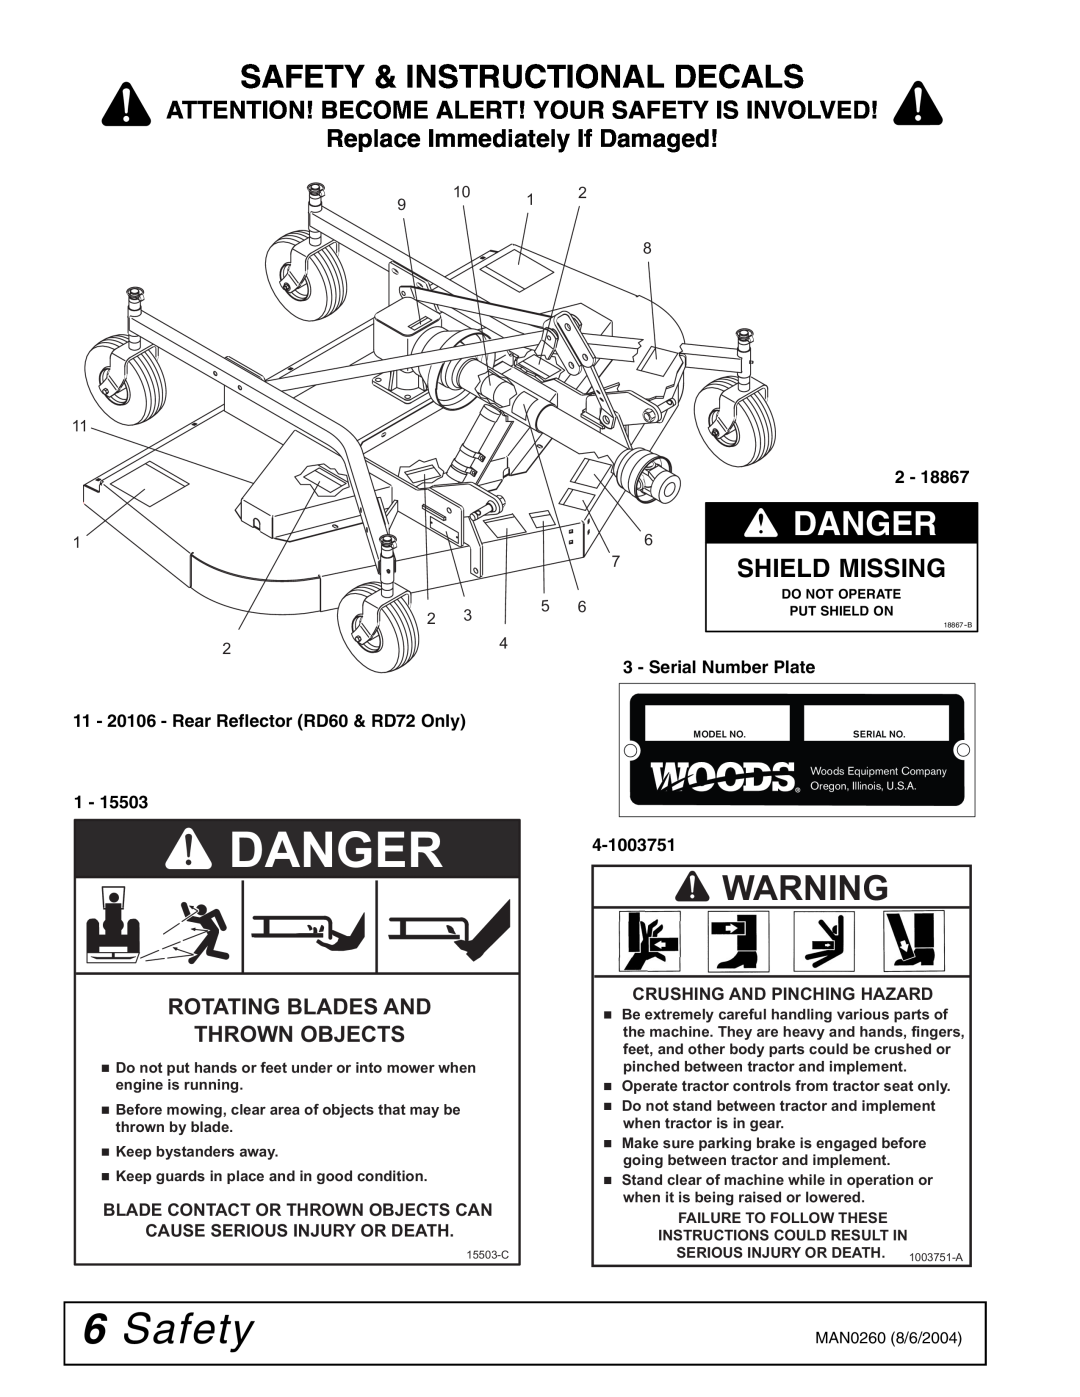 Woods Equipment RDC54, RD60, RD72 manual Safety & Instructional Decals, Replace Immediately If Damaged, Shield Missing 